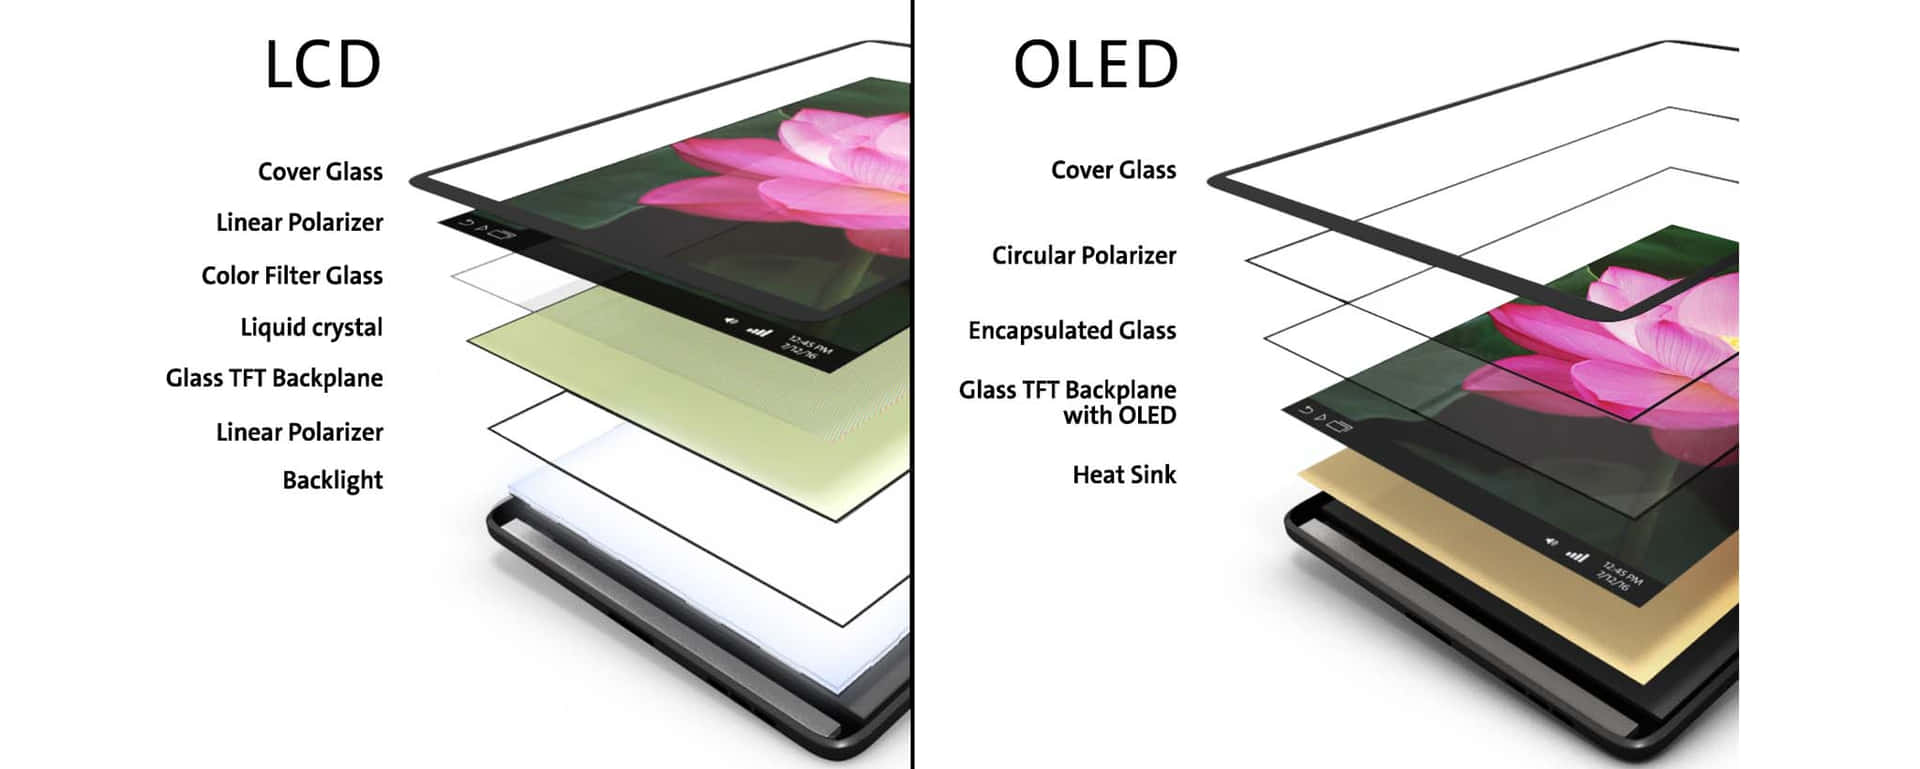 Oled Vs. Lcd Picture